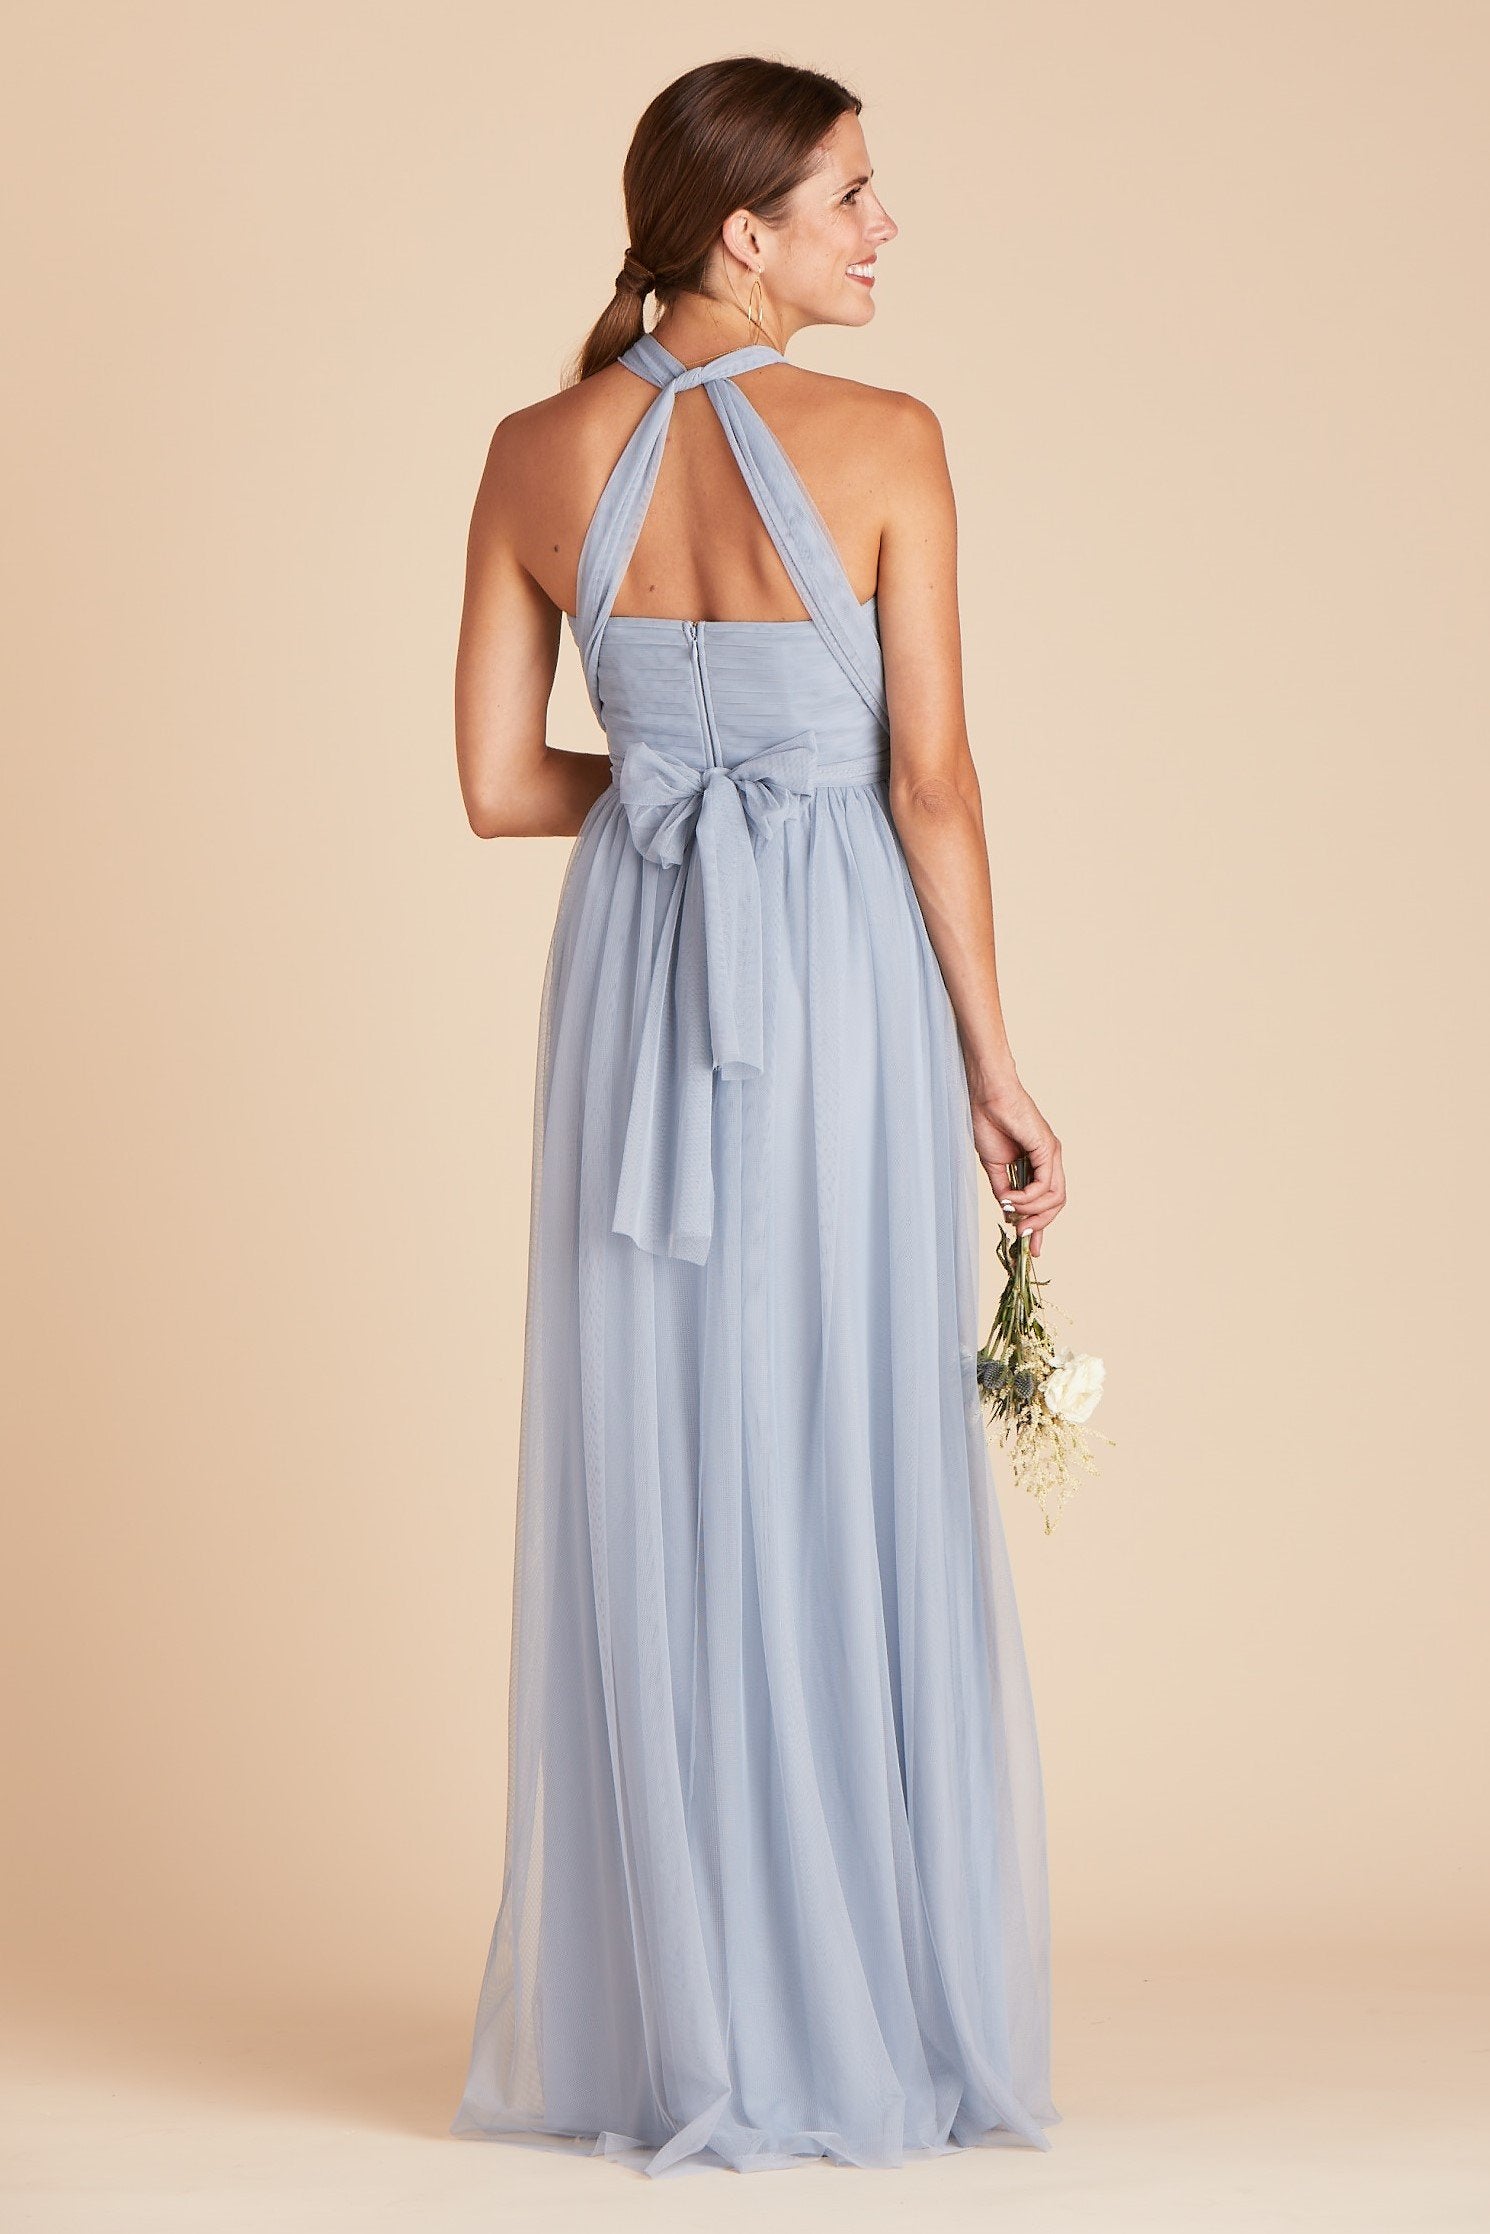 Christina convertible bridesmaid dress in dusty blue tulle by Birdy Grey, back view